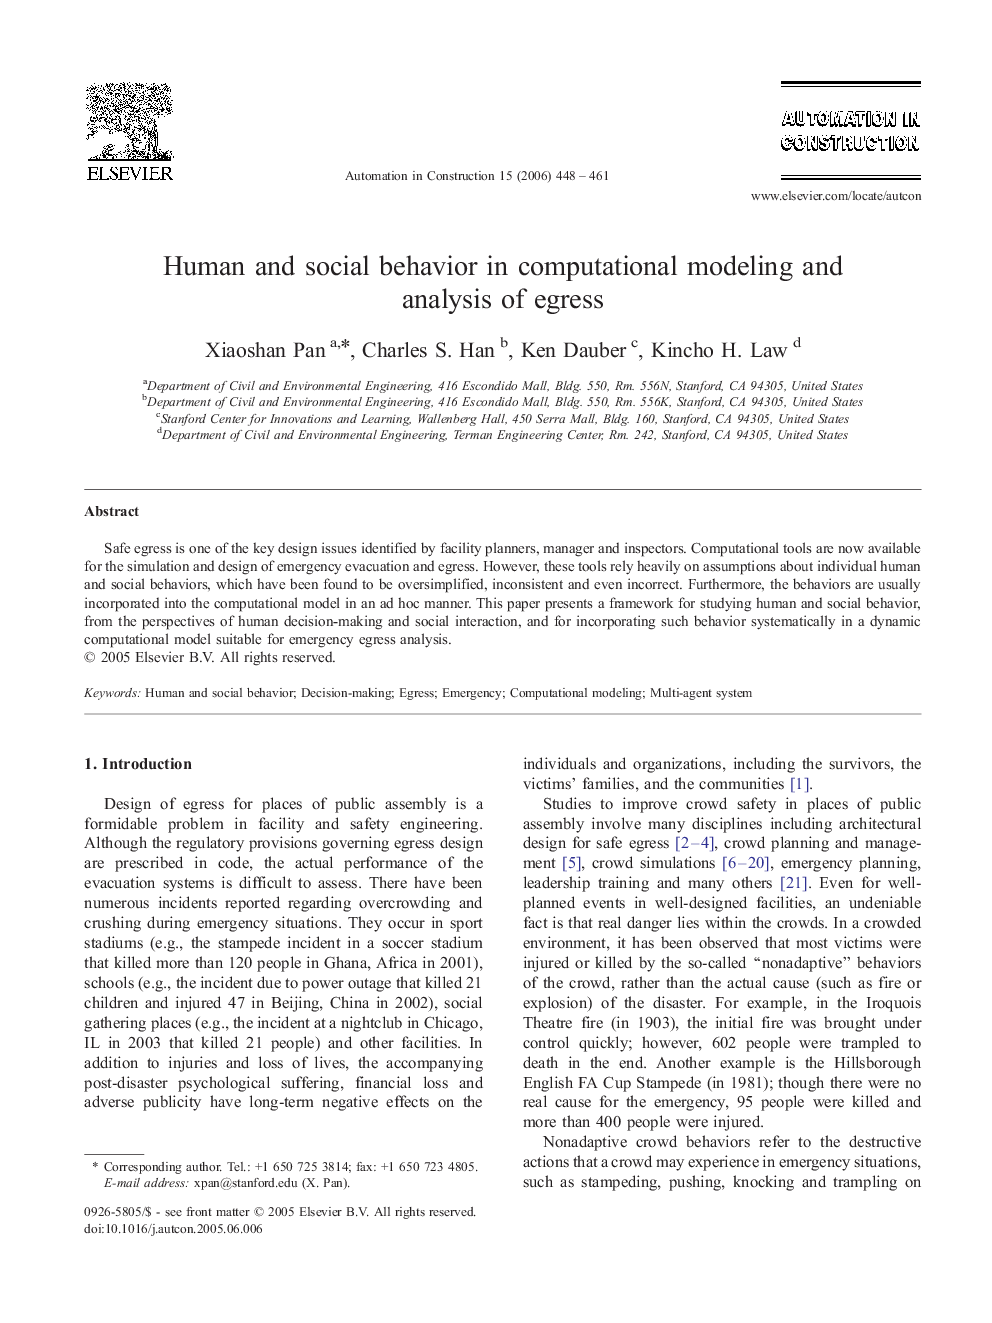 Human and social behavior in computational modeling and analysis of egress